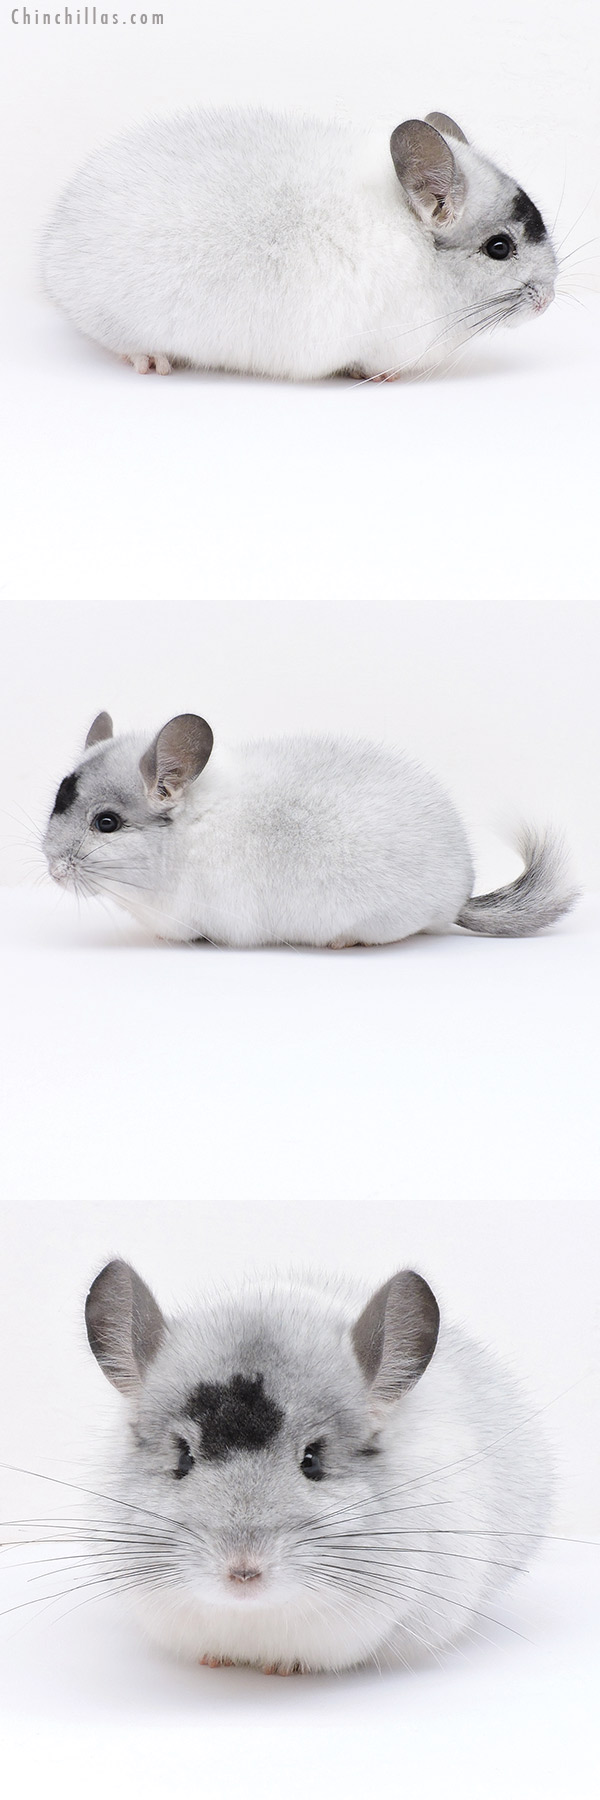 Chinchilla or related item offered for sale or export on Chinchillas.com - 19028 Herd Improvement Quality Extreme White Mosaic Male Chinchilla